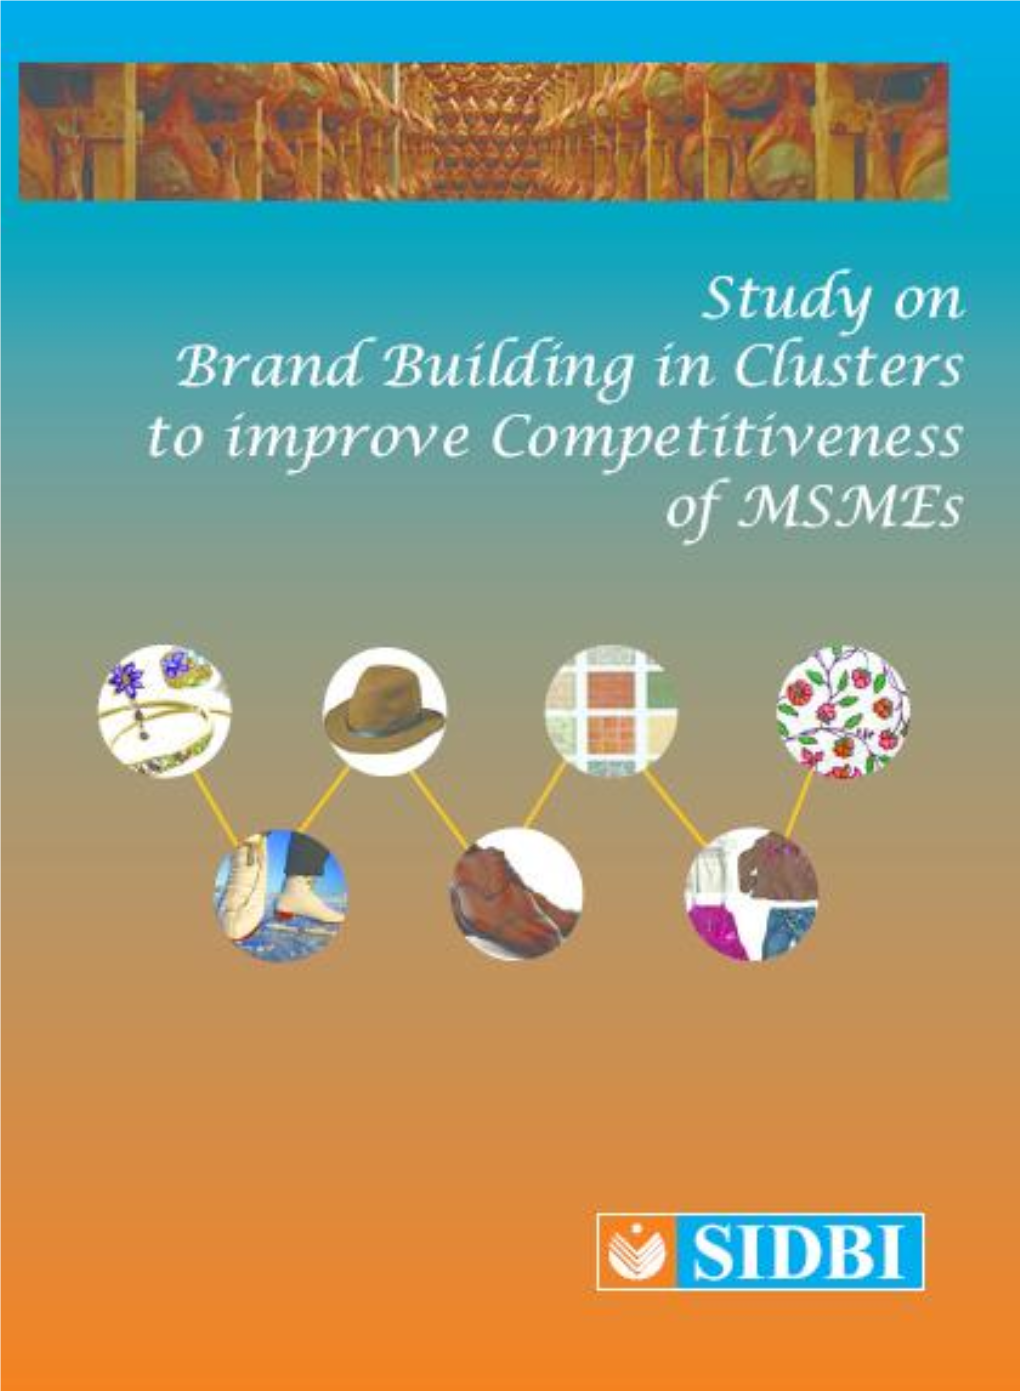 Brand Building in Clusters to Improve Competitiveness of Msmes”